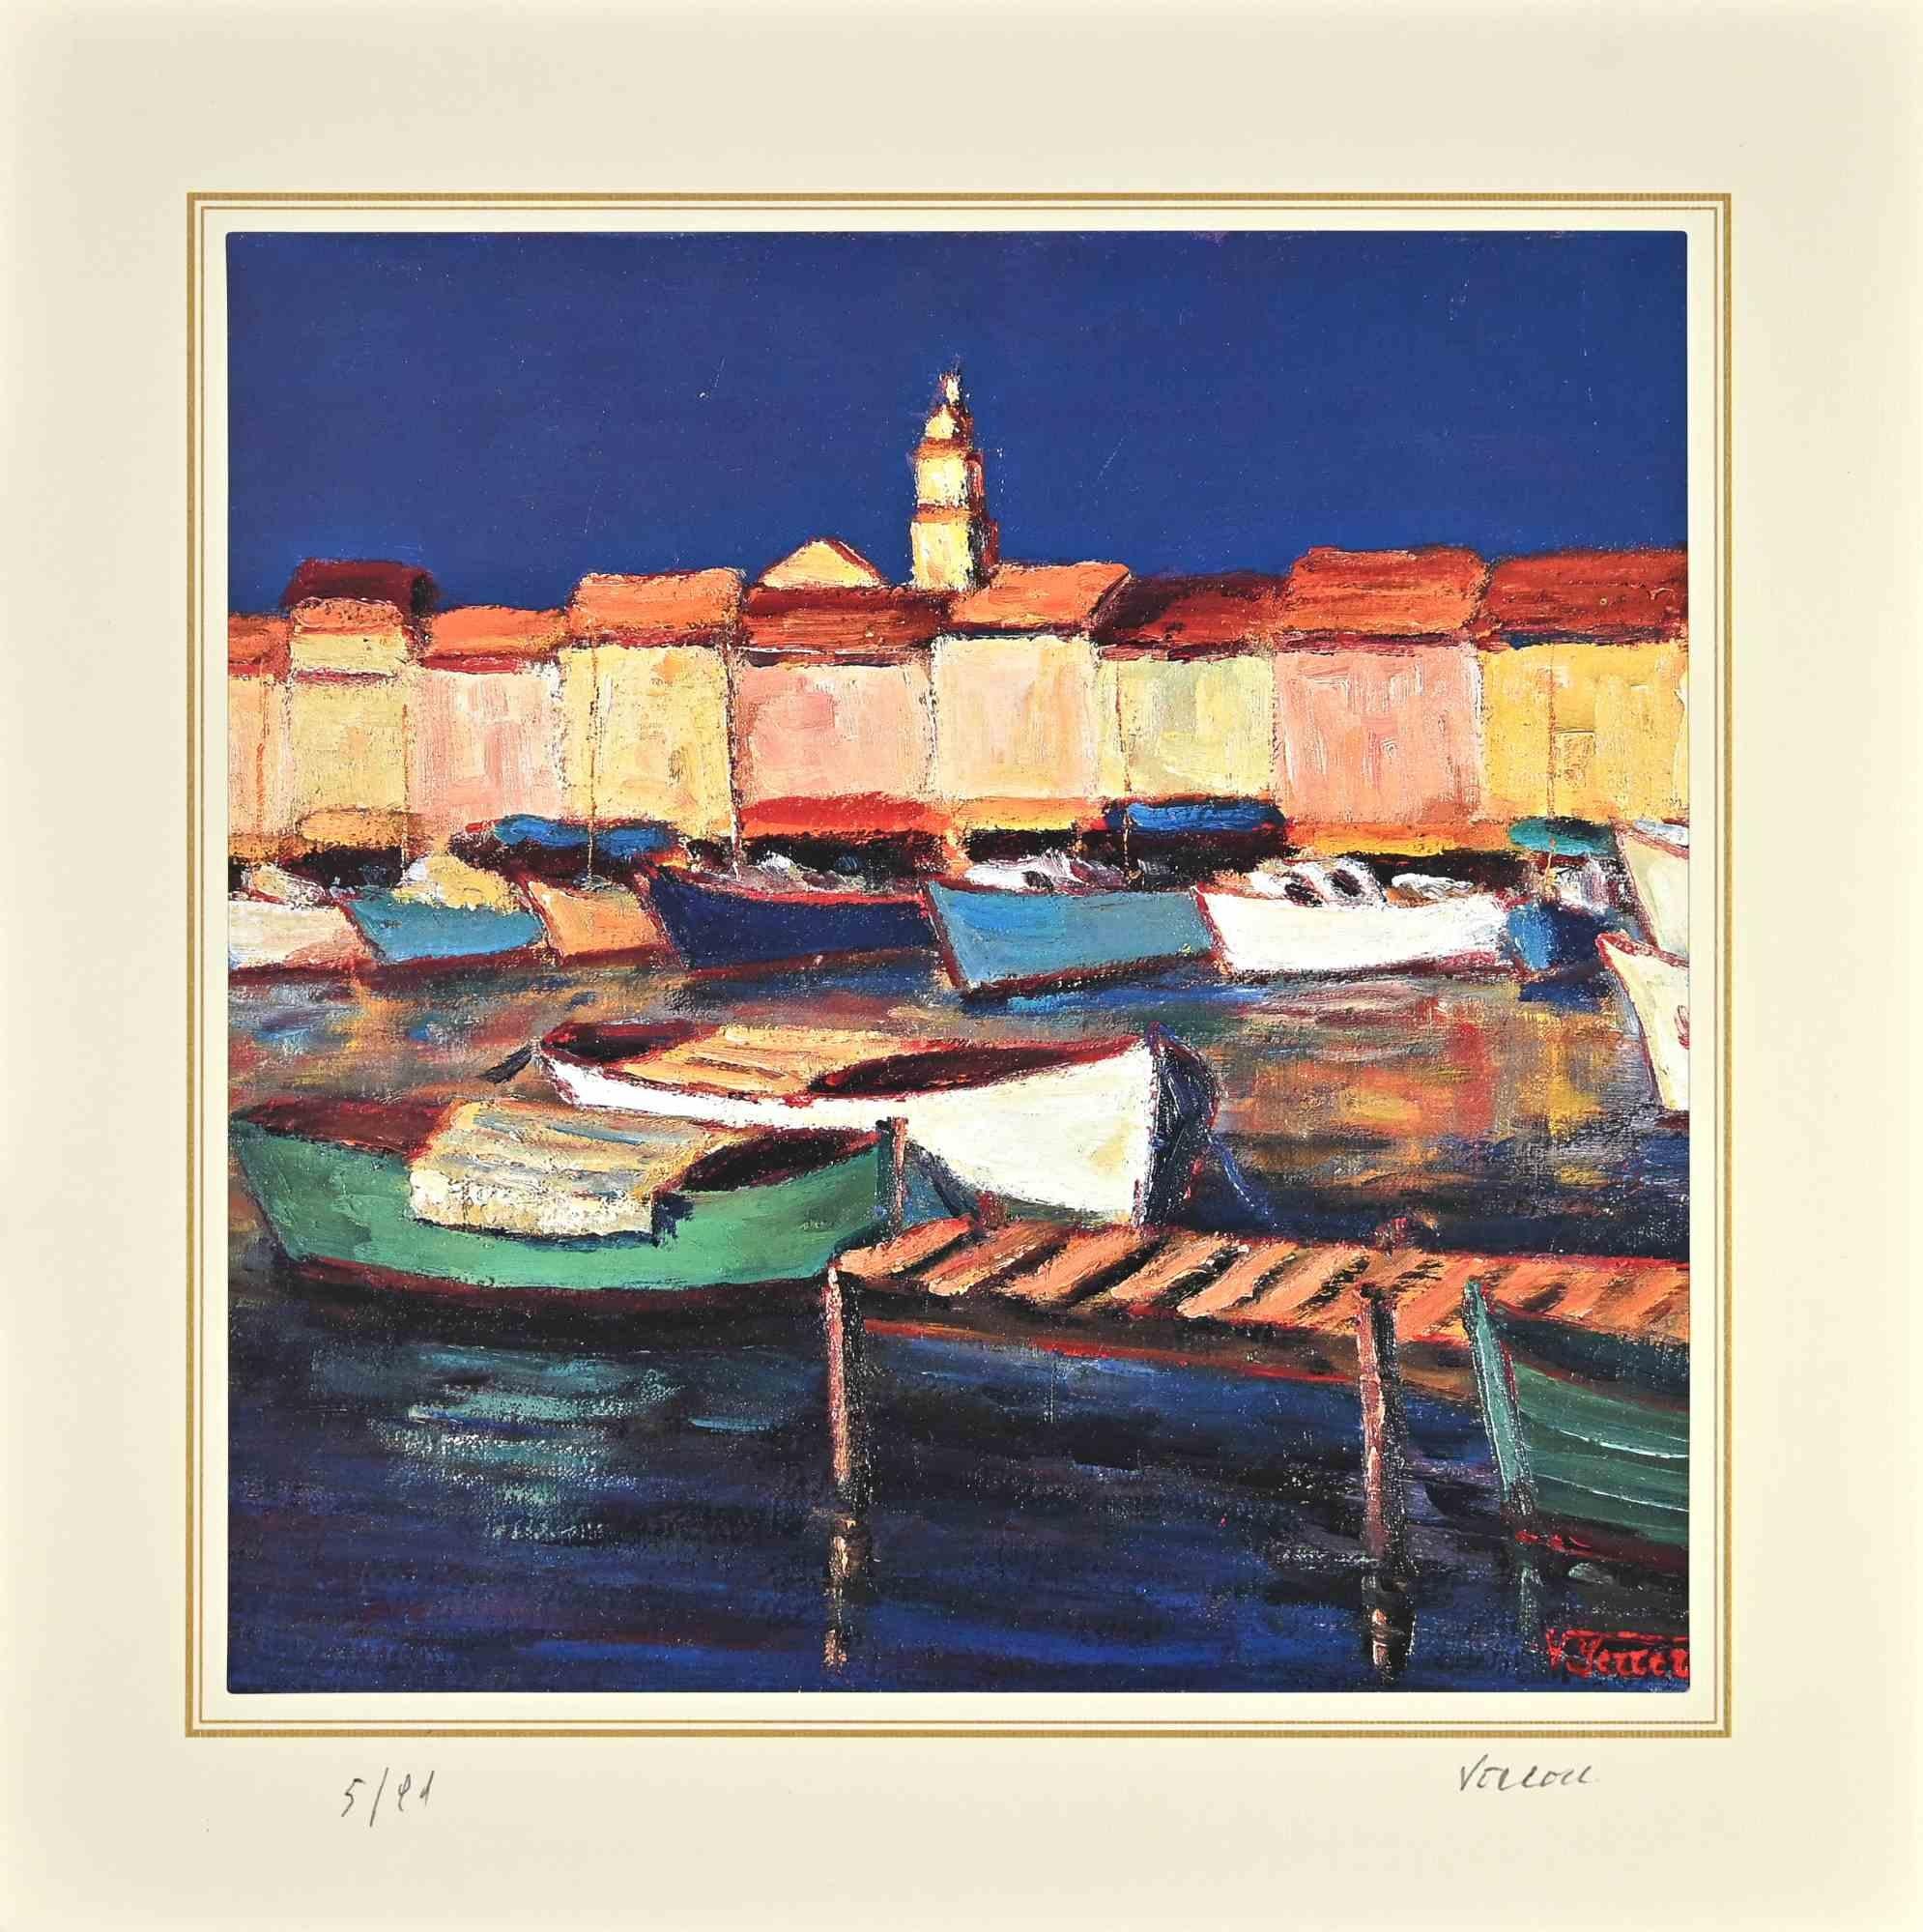 The Picturesque Harbor is a lithograph attributed to Nicholas Verrall (1945) in the Late 20th Century.

Hand-signed on the right corner. Numbered, Edition, 5/99, on the left margin. On the back is the label of the certificate of  authenticity.

The